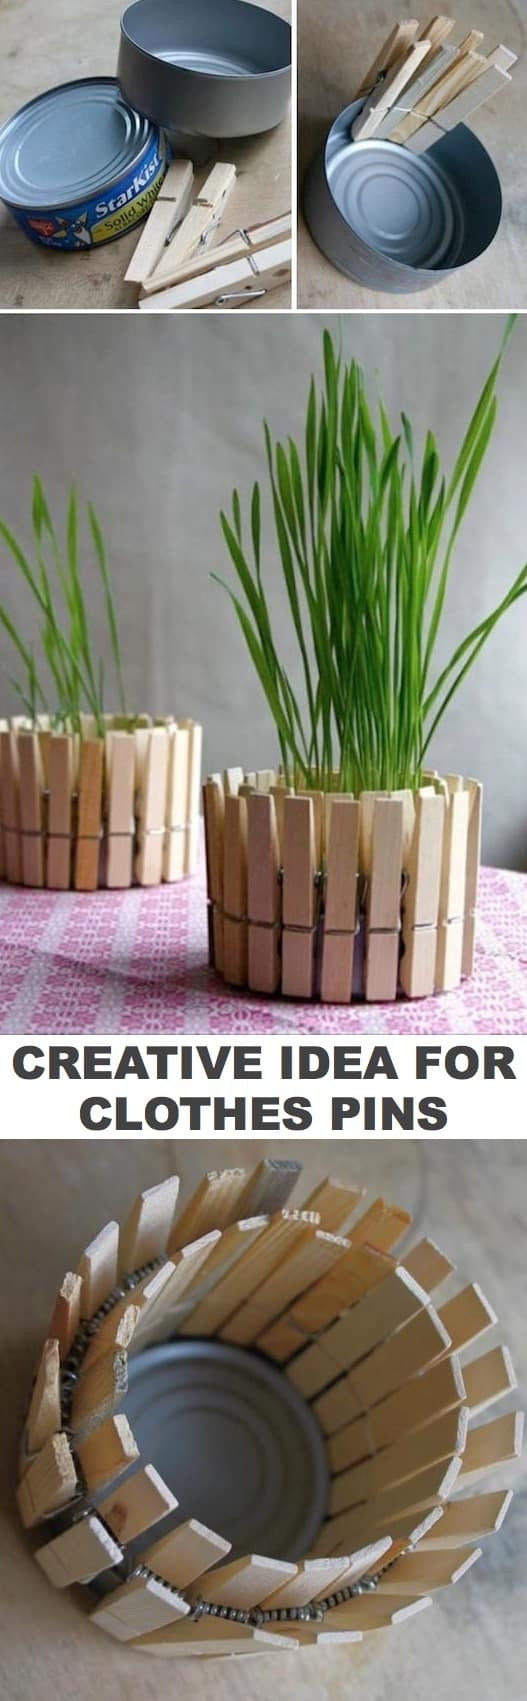 Art And Craft Ideas For Adults At Home
 30 Easy Craft Ideas That Will Spark Your Creativity DIY